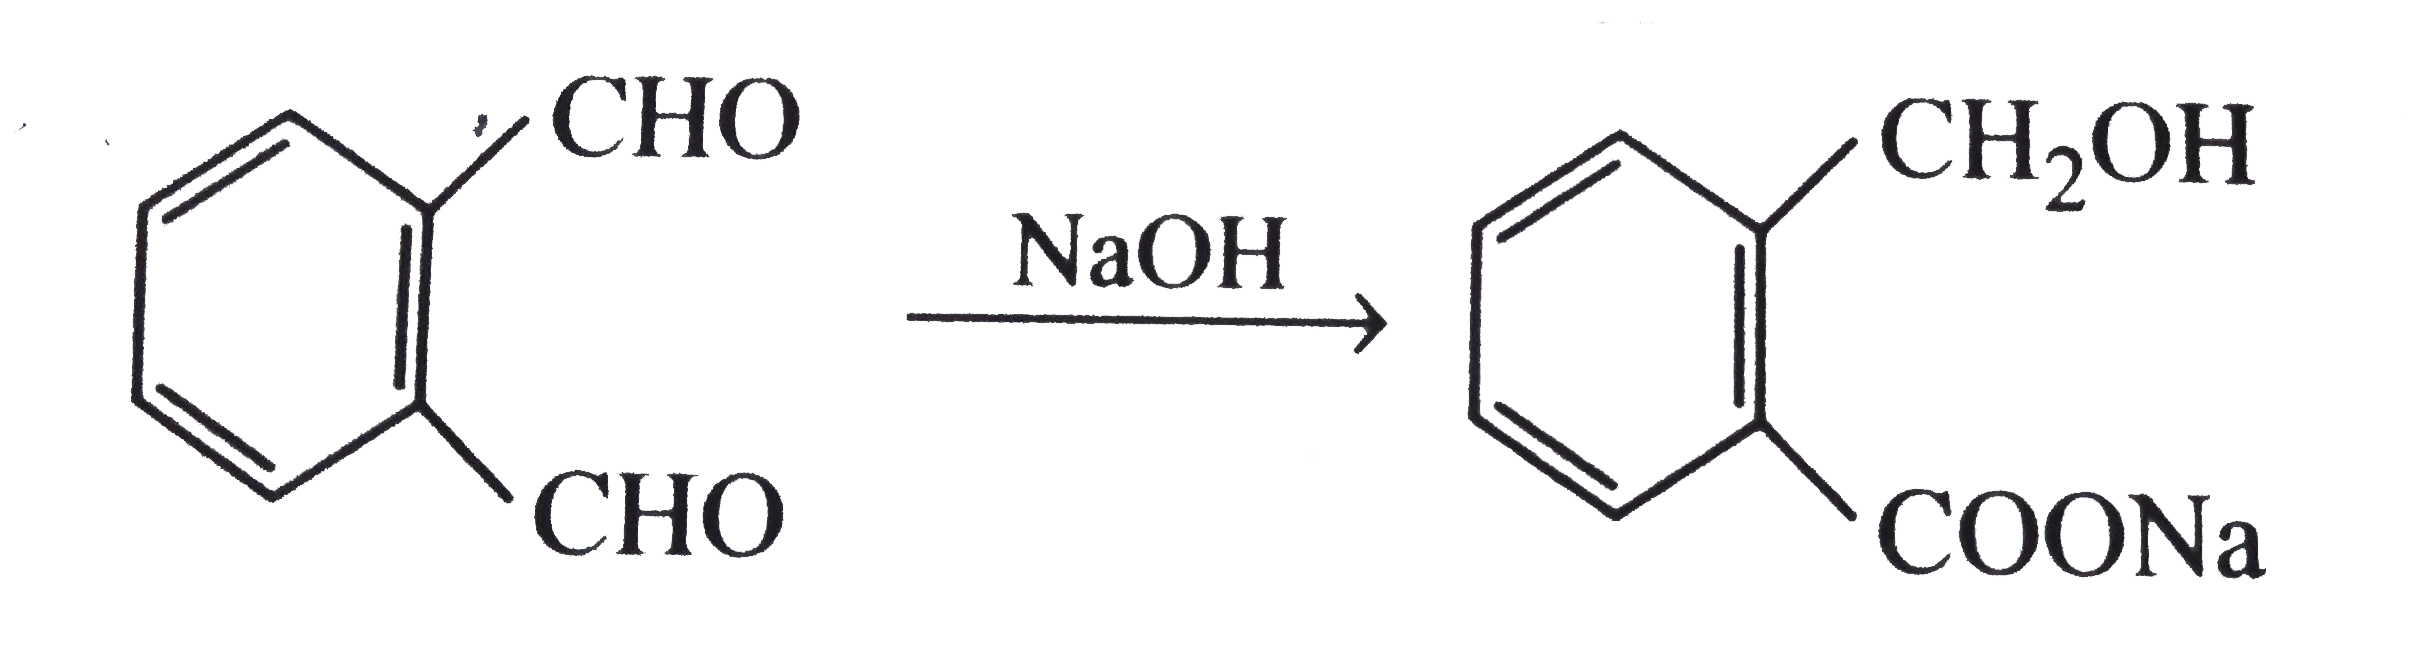 Aldehydes undergo disproportionation reaction in presence of aqueous NaOH. Simultaneous oxidation and reduction of a compound is scientifically called as disproportionatio.   Aldehydes having no alpha- hydrogen show this reaction called Cannizzaro's reactio. Few exceptions are also there to this generalisation.   The reaction may be represented as :   C(6)H(5)CHO+C(6)H(5)CHOoverset(NaOH)underset(Delta)rarrC(6)H(5)COONa+C(6)H(5)CH(2)OH   Intramolecular Carrizzaro's reaction is also possible.     The aldehyde having alpha hydrogen which gives Cannizzaro's reaction is :